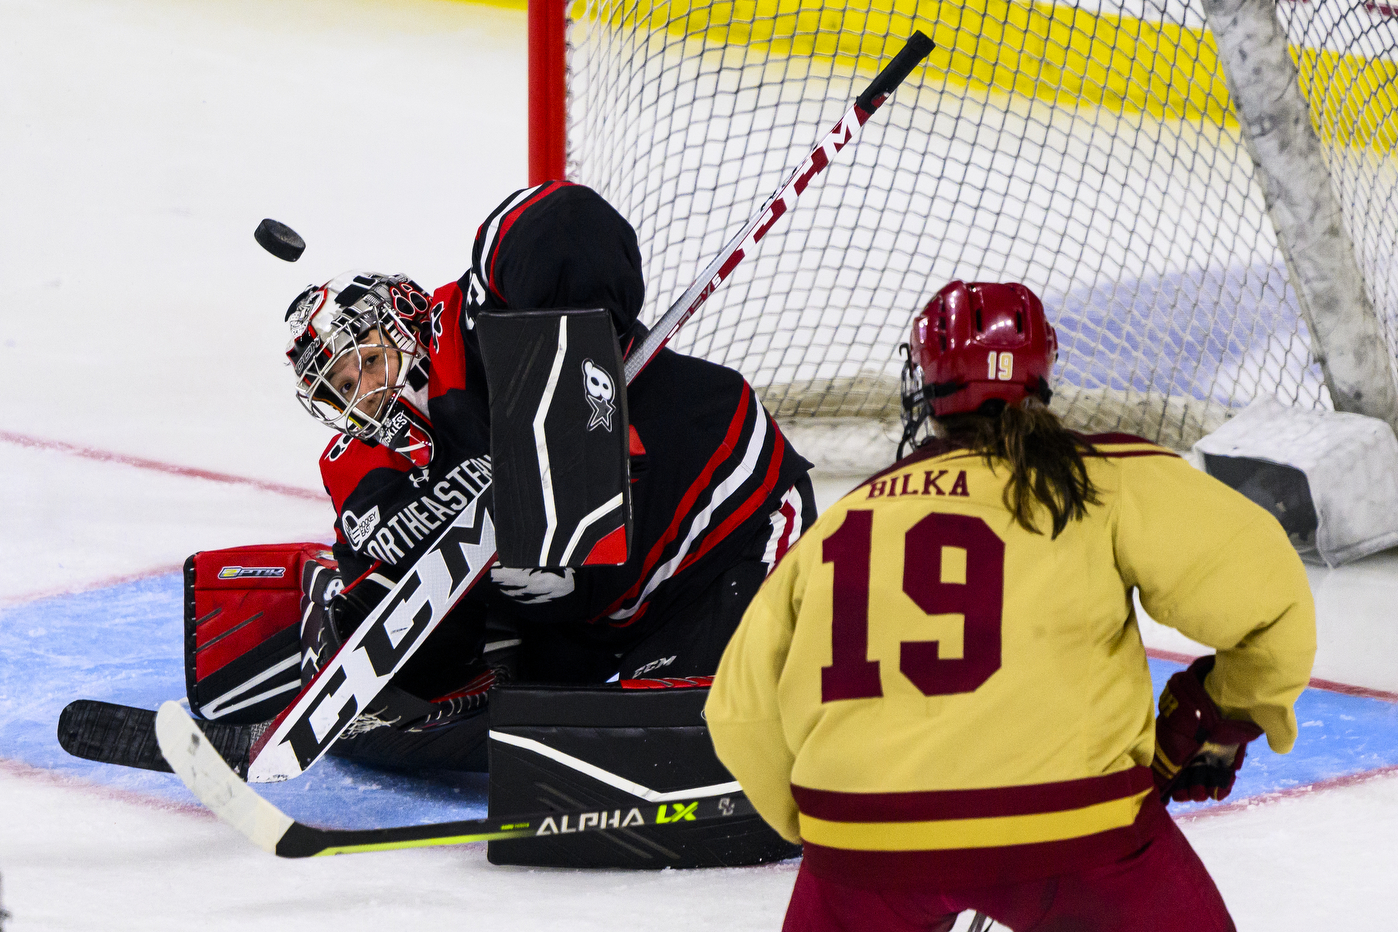 A Northeastern women's goalie looks up at a hockey puck that is flying towards her in the air as a BC hockey player looks on. 